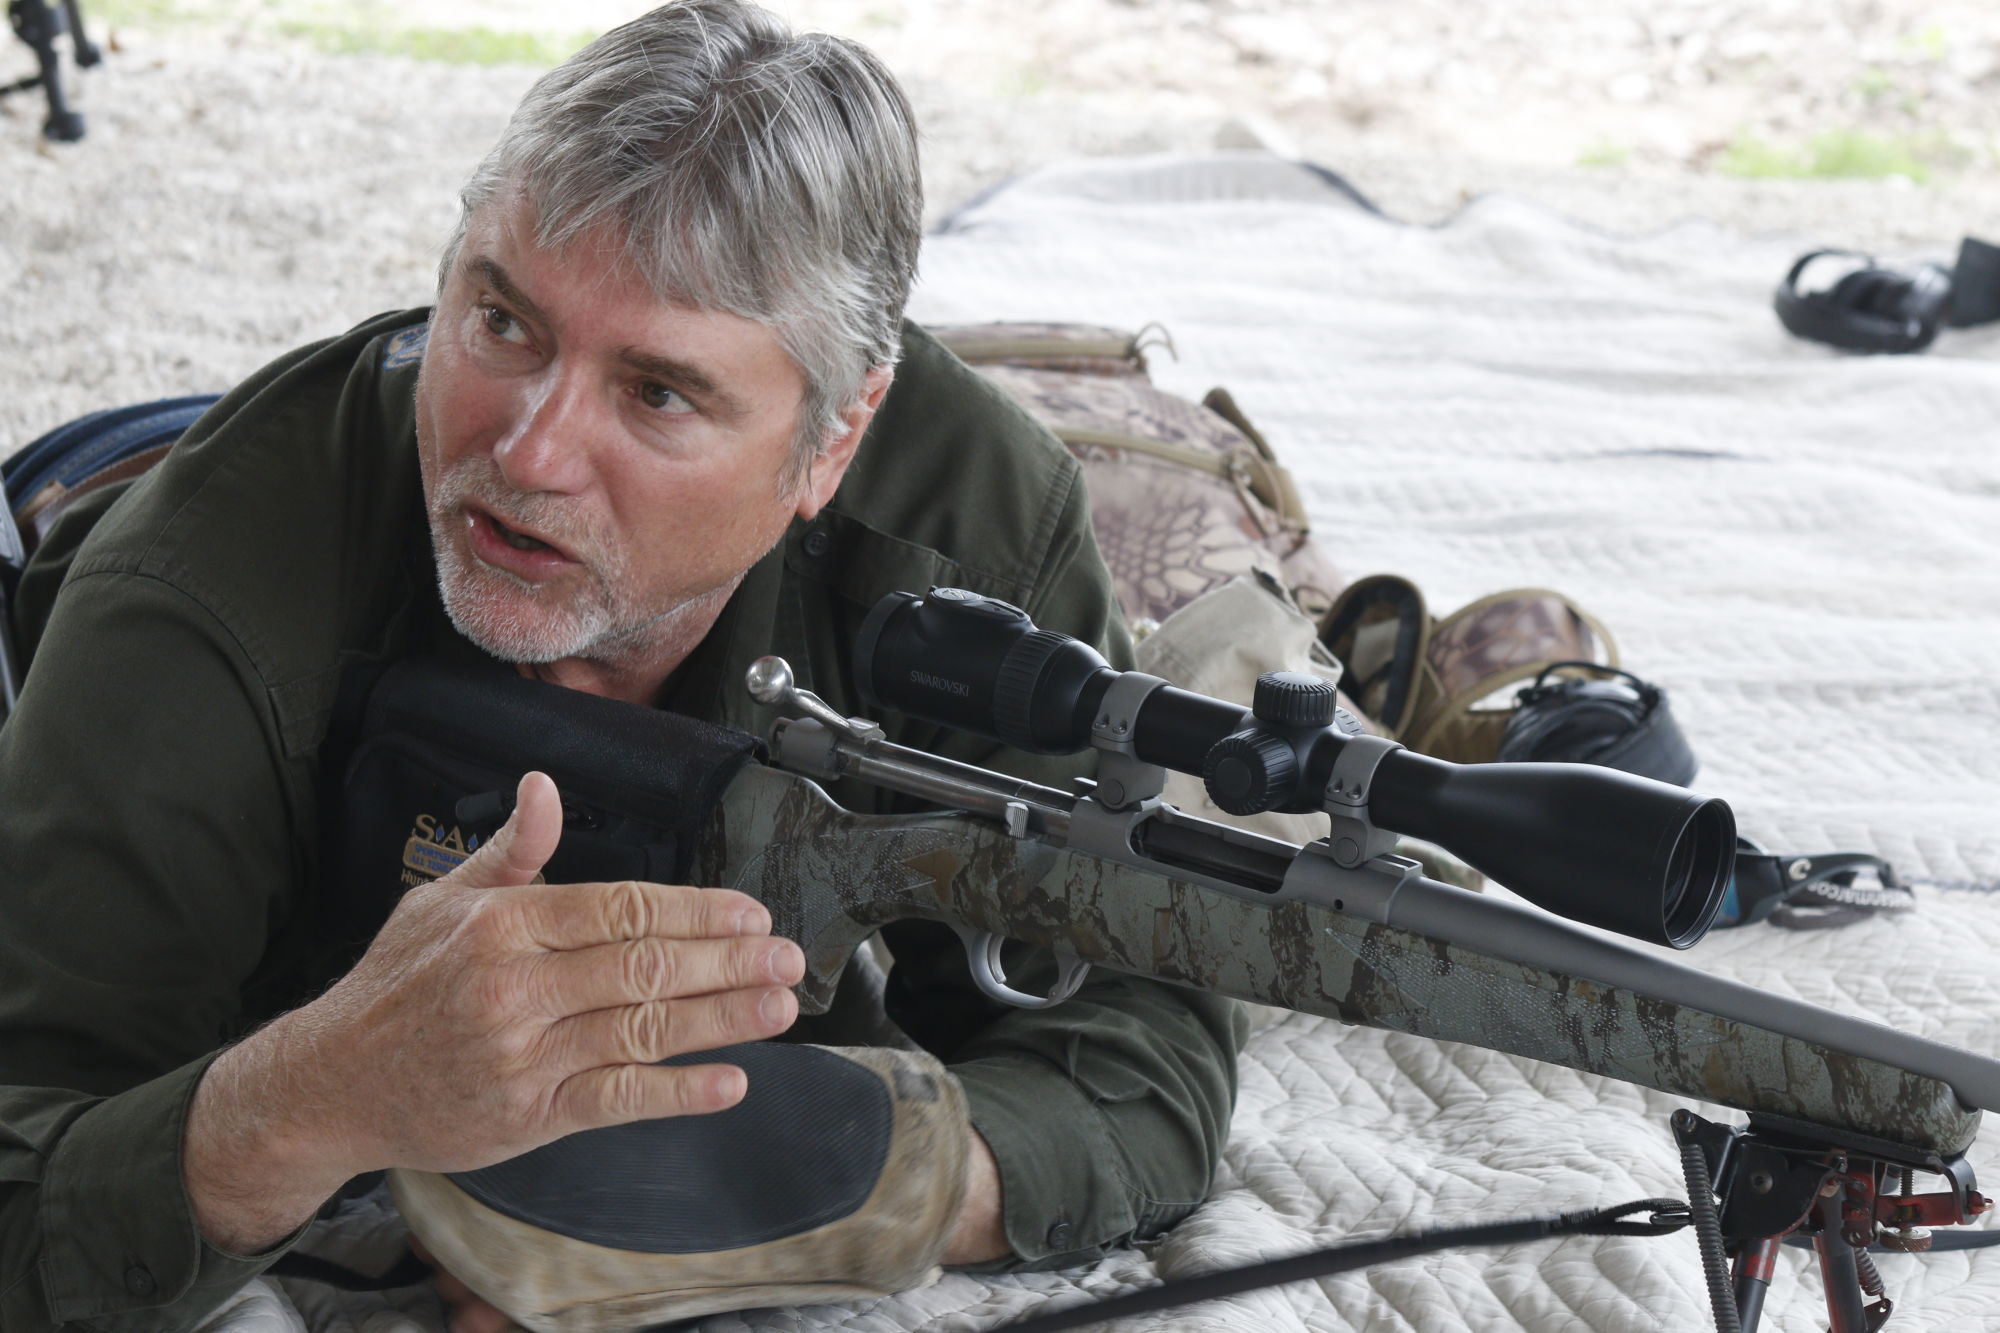 Boom. Clang. – Ron Spomer’s experiences during shooting training H/ - Ron 